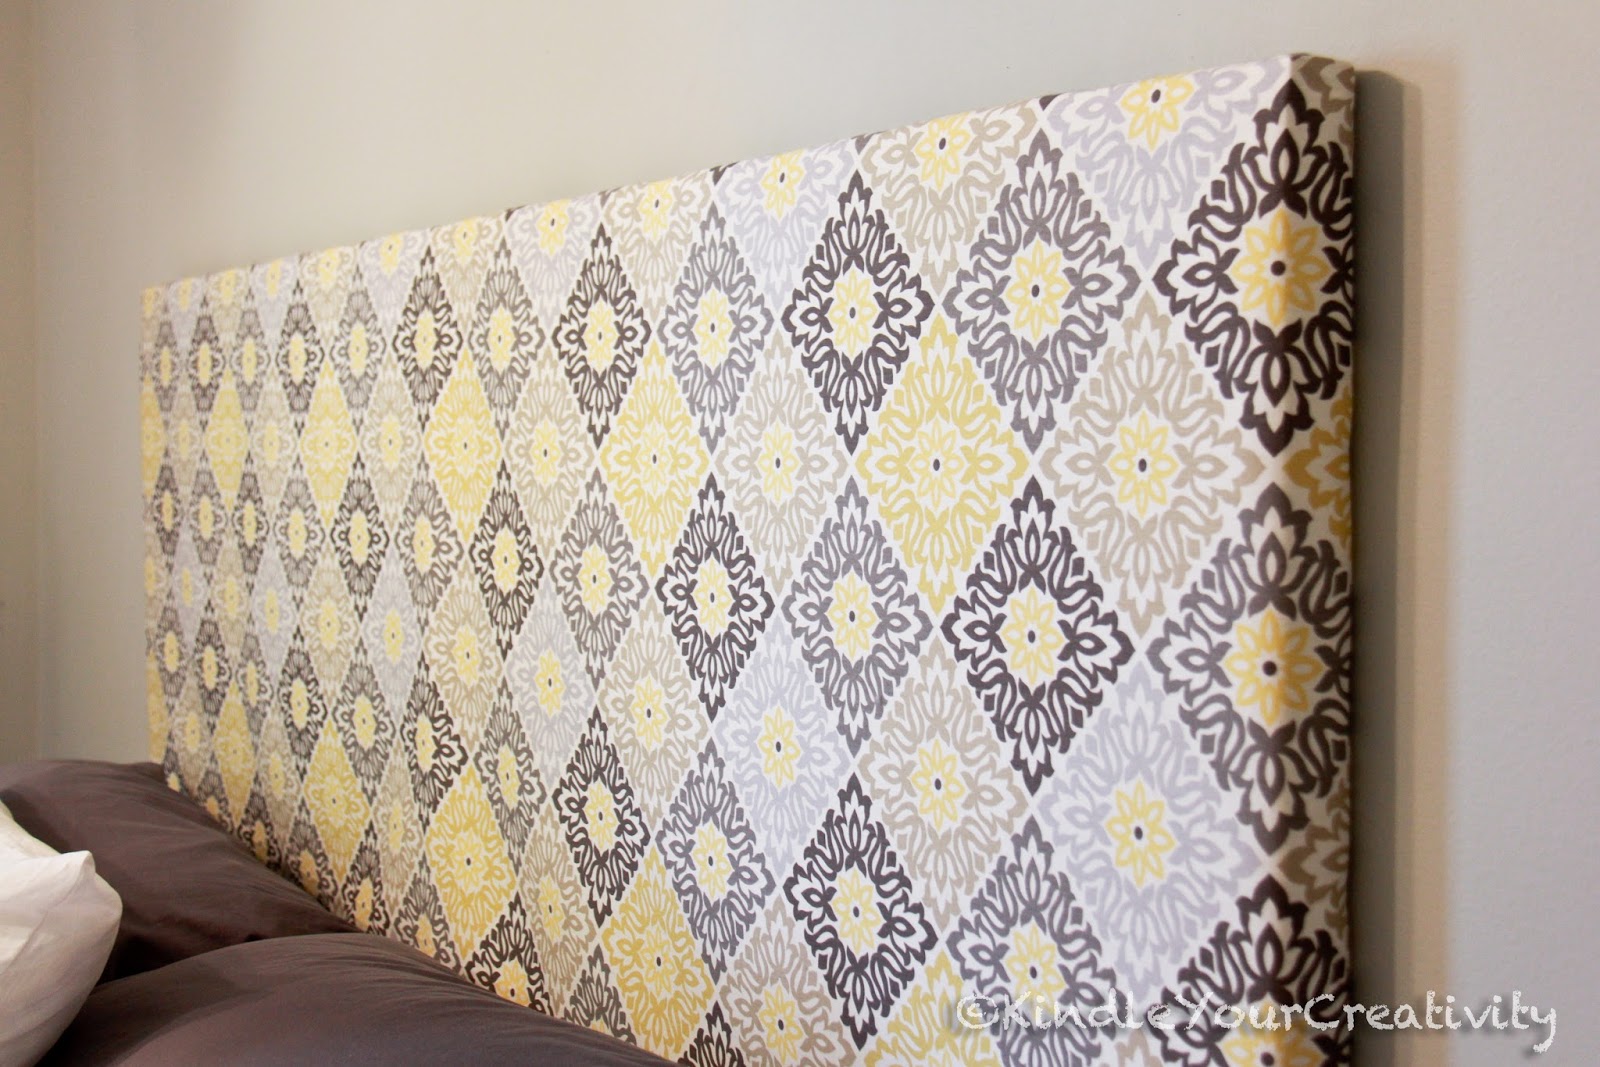 Diy Fabric Headboard, How To Make A Headboard Out Of Fabric